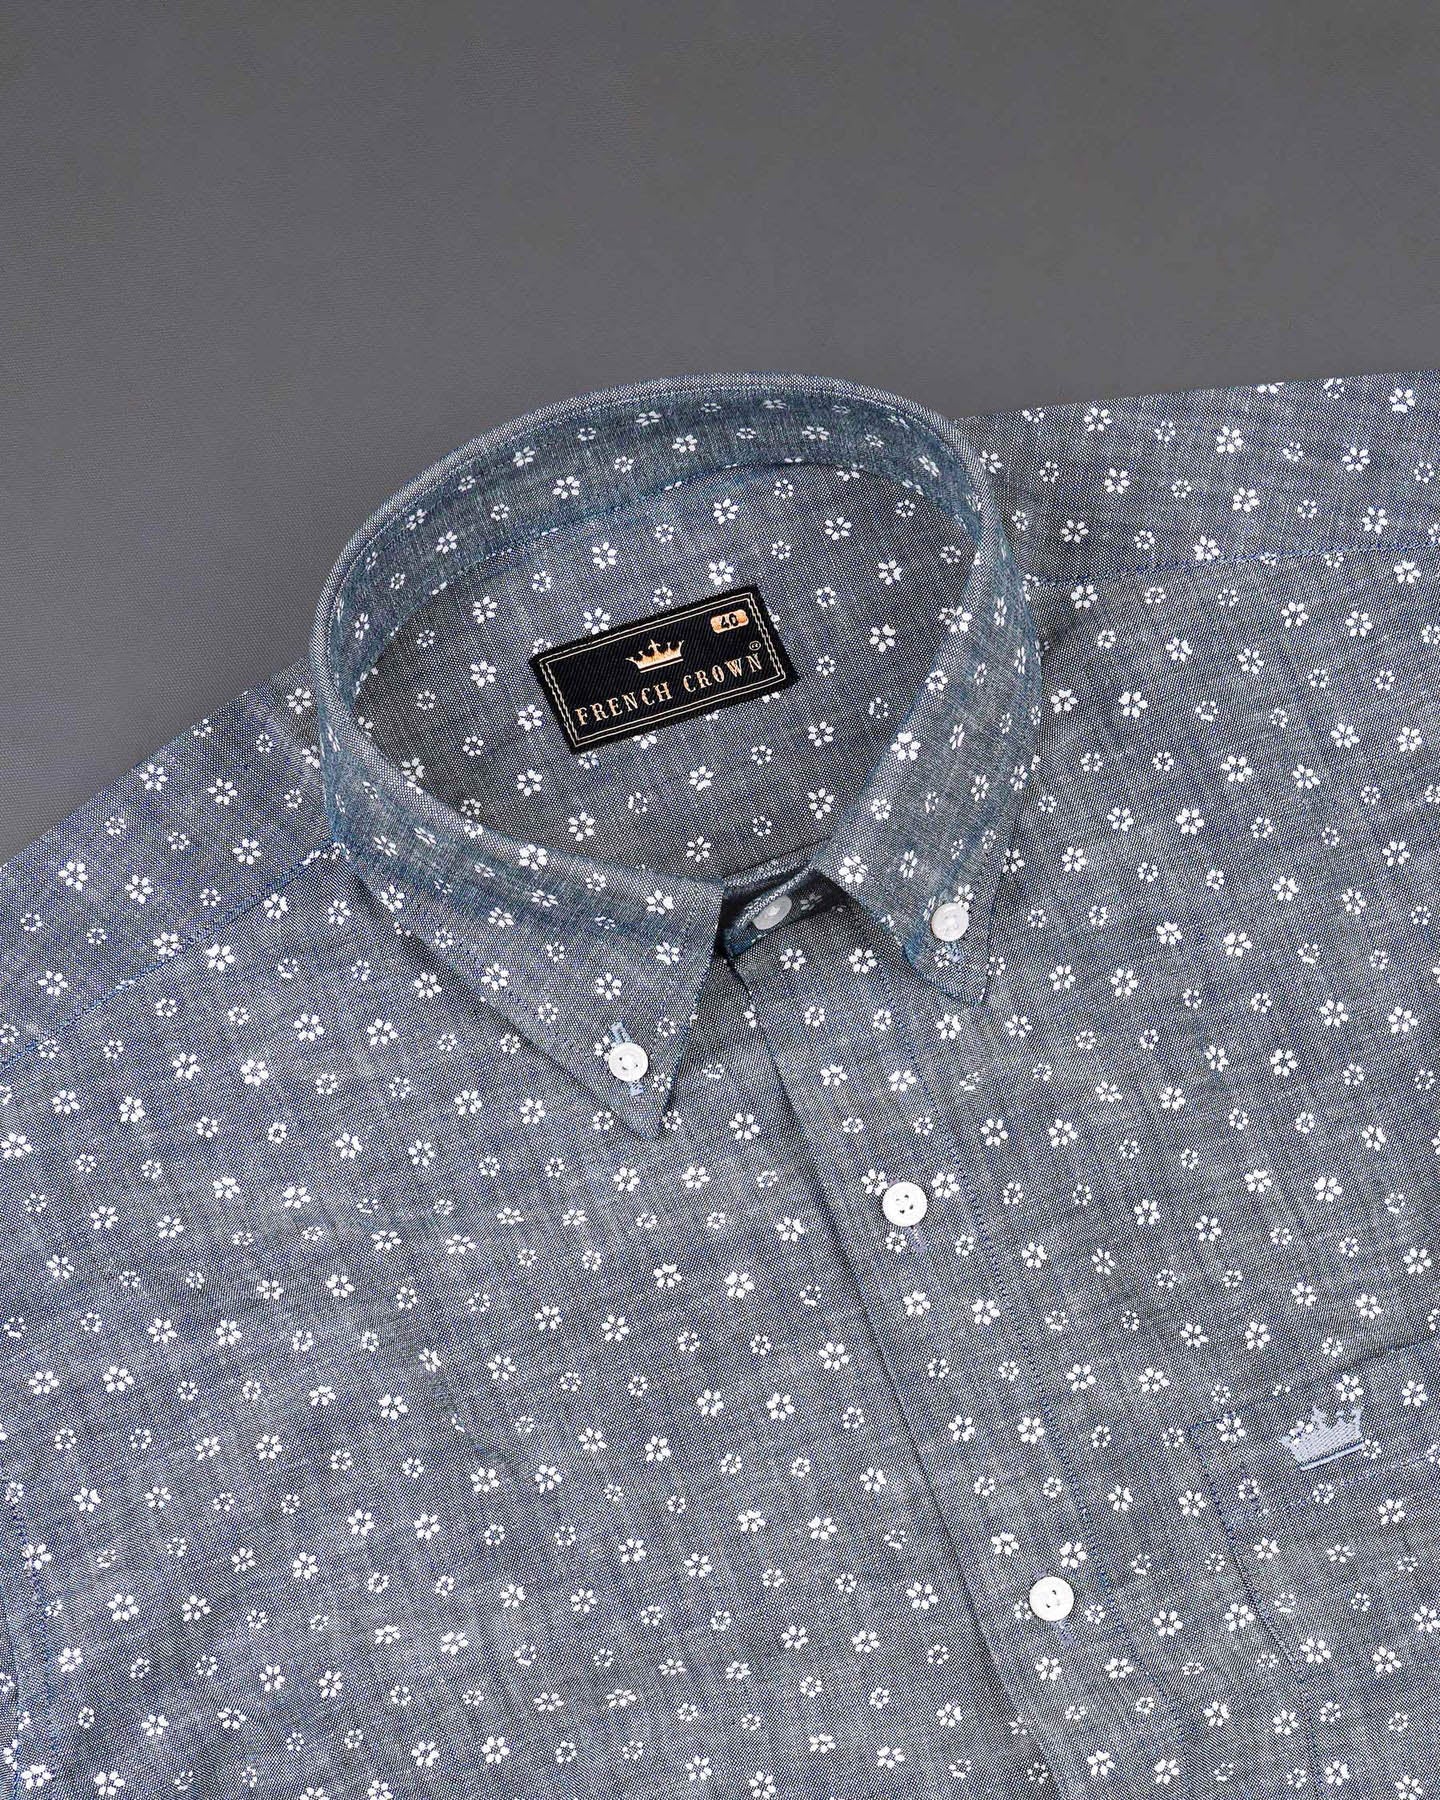 East Bay Gray Ditzy Floral Printed Chambray Premium Cotton Shirt 7984-BD -38,7984-BD -H-38,7984-BD -39,7984-BD -H-39,7984-BD -40,7984-BD -H-40,7984-BD -42,7984-BD -H-42,7984-BD -44,7984-BD -H-44,7984-BD -46,7984-BD -H-46,7984-BD -48,7984-BD -H-48,7984-BD -50,7984-BD -H-50,7984-BD -52,7984-BD -H-52